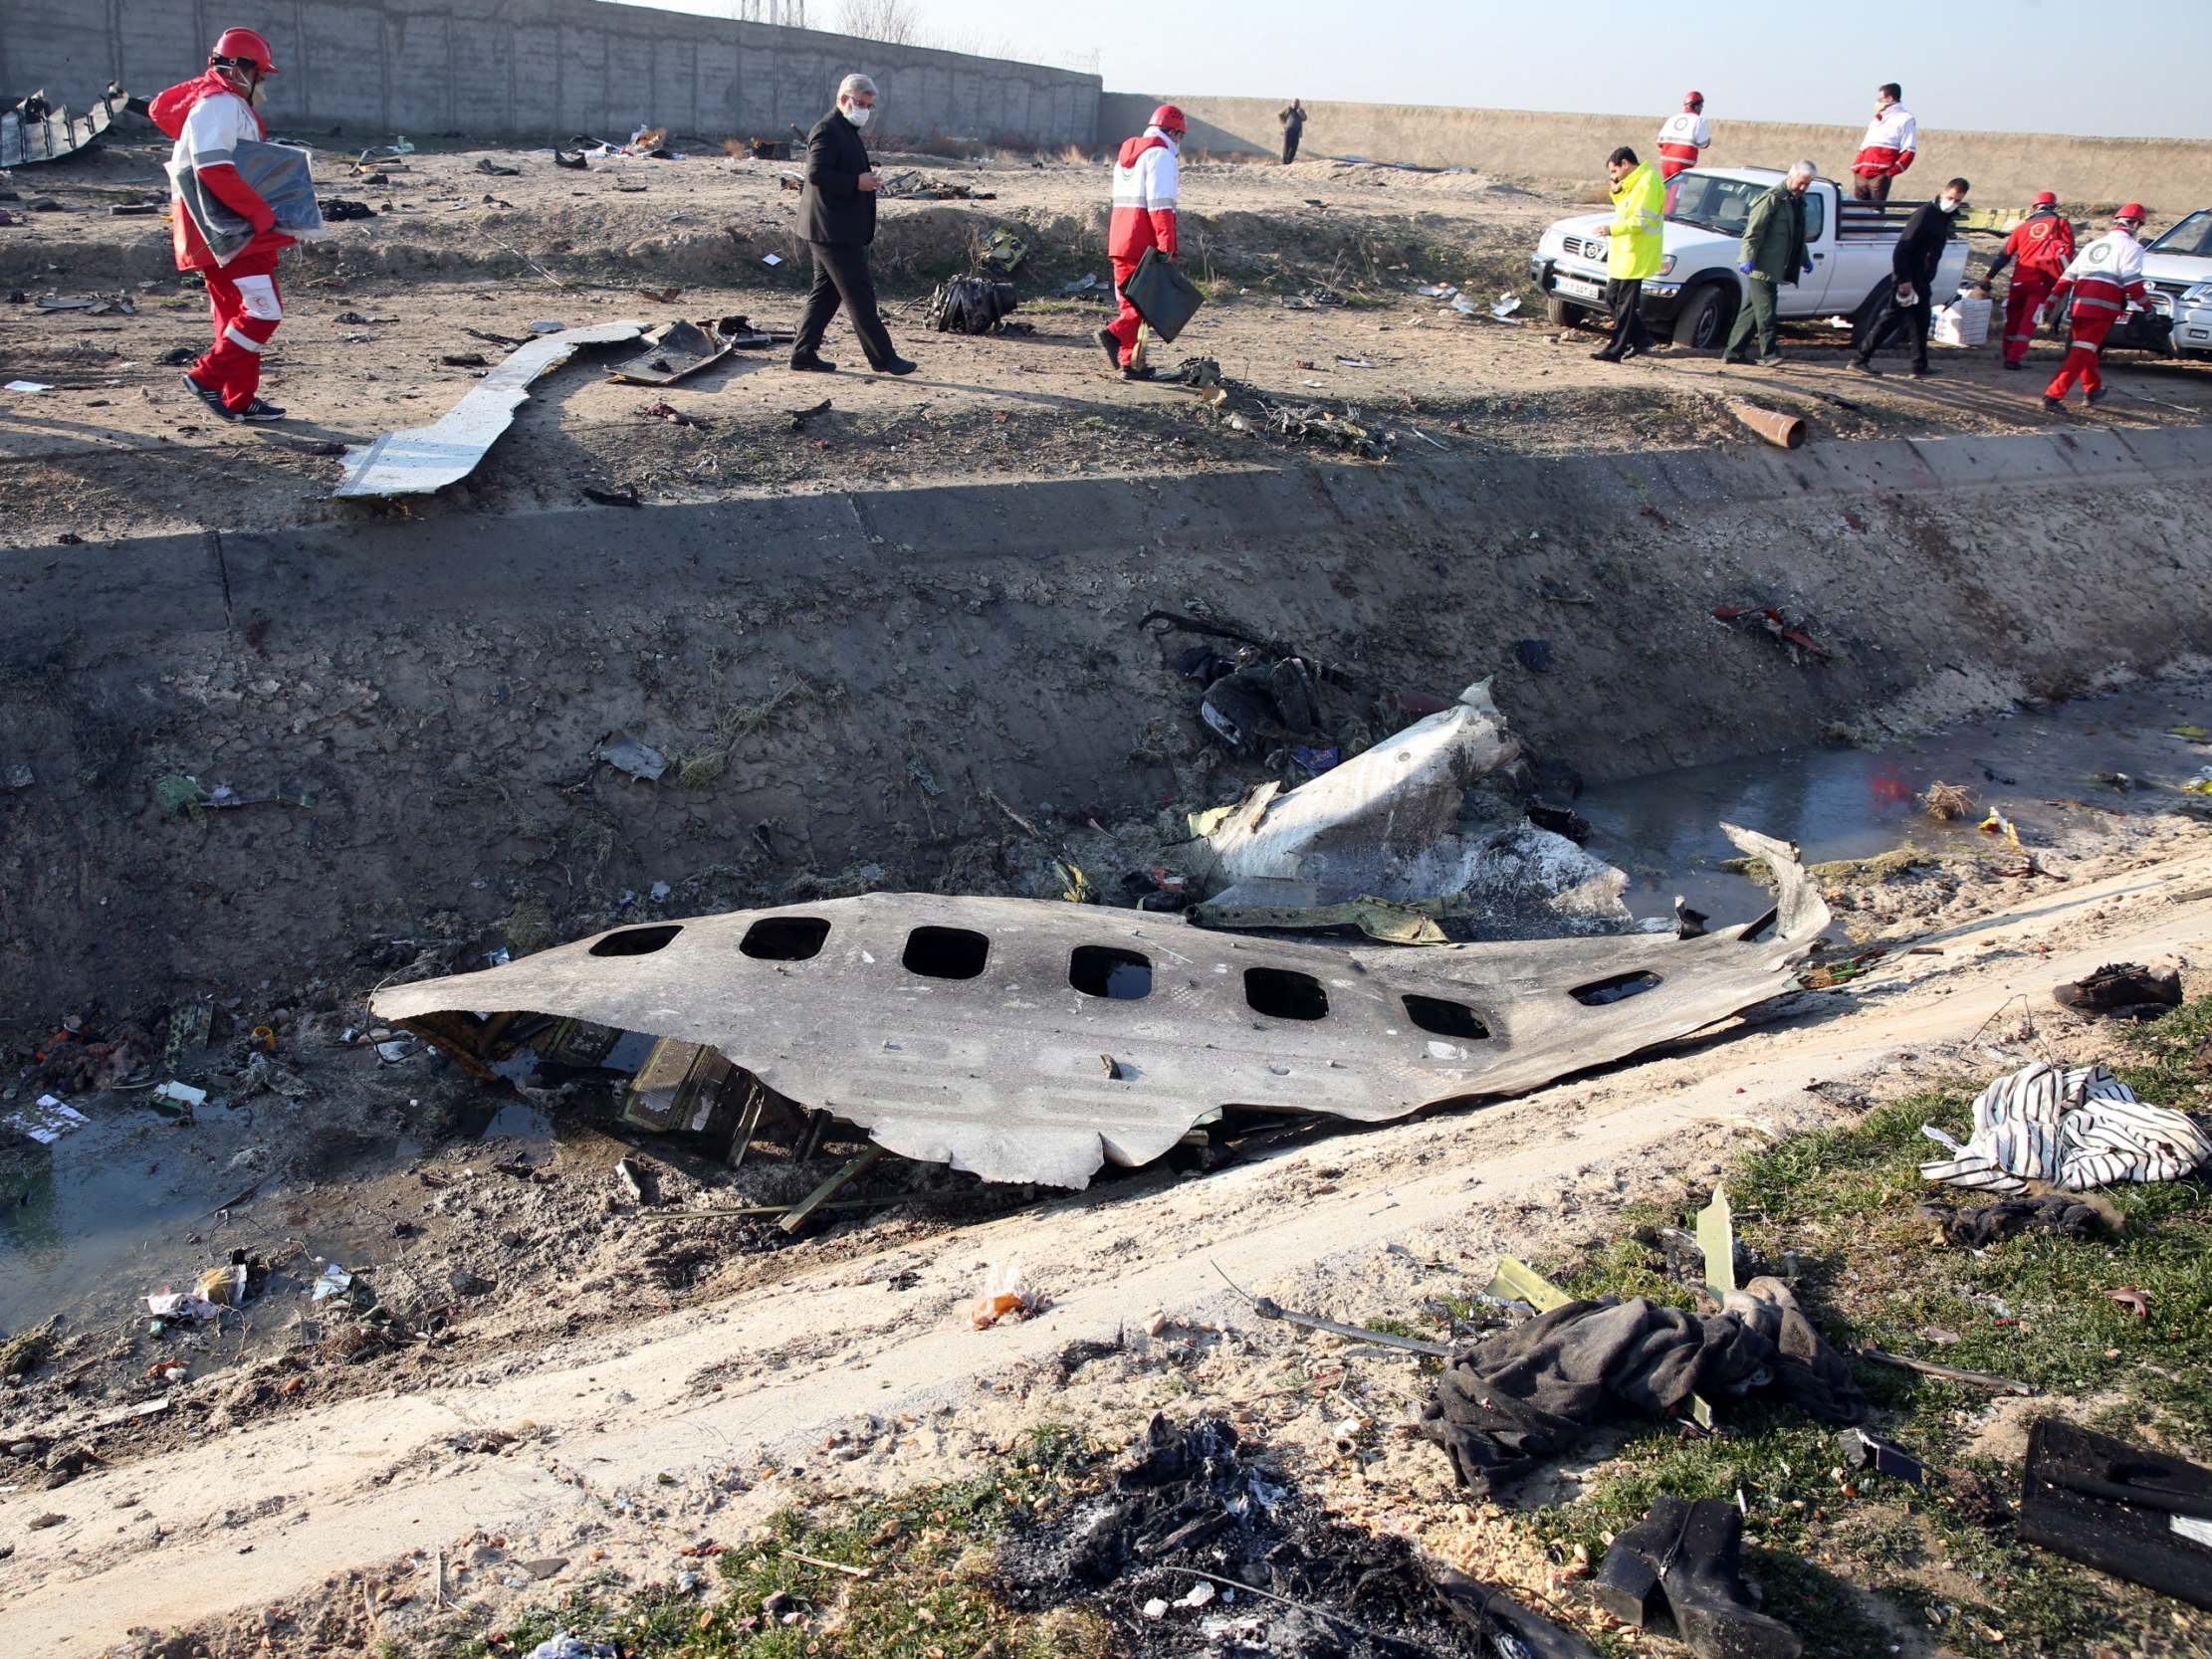 Officials stand near the wreckage of a Ukraine International Airlines Boeing 737-800 near Tehran after a crash that killed 176